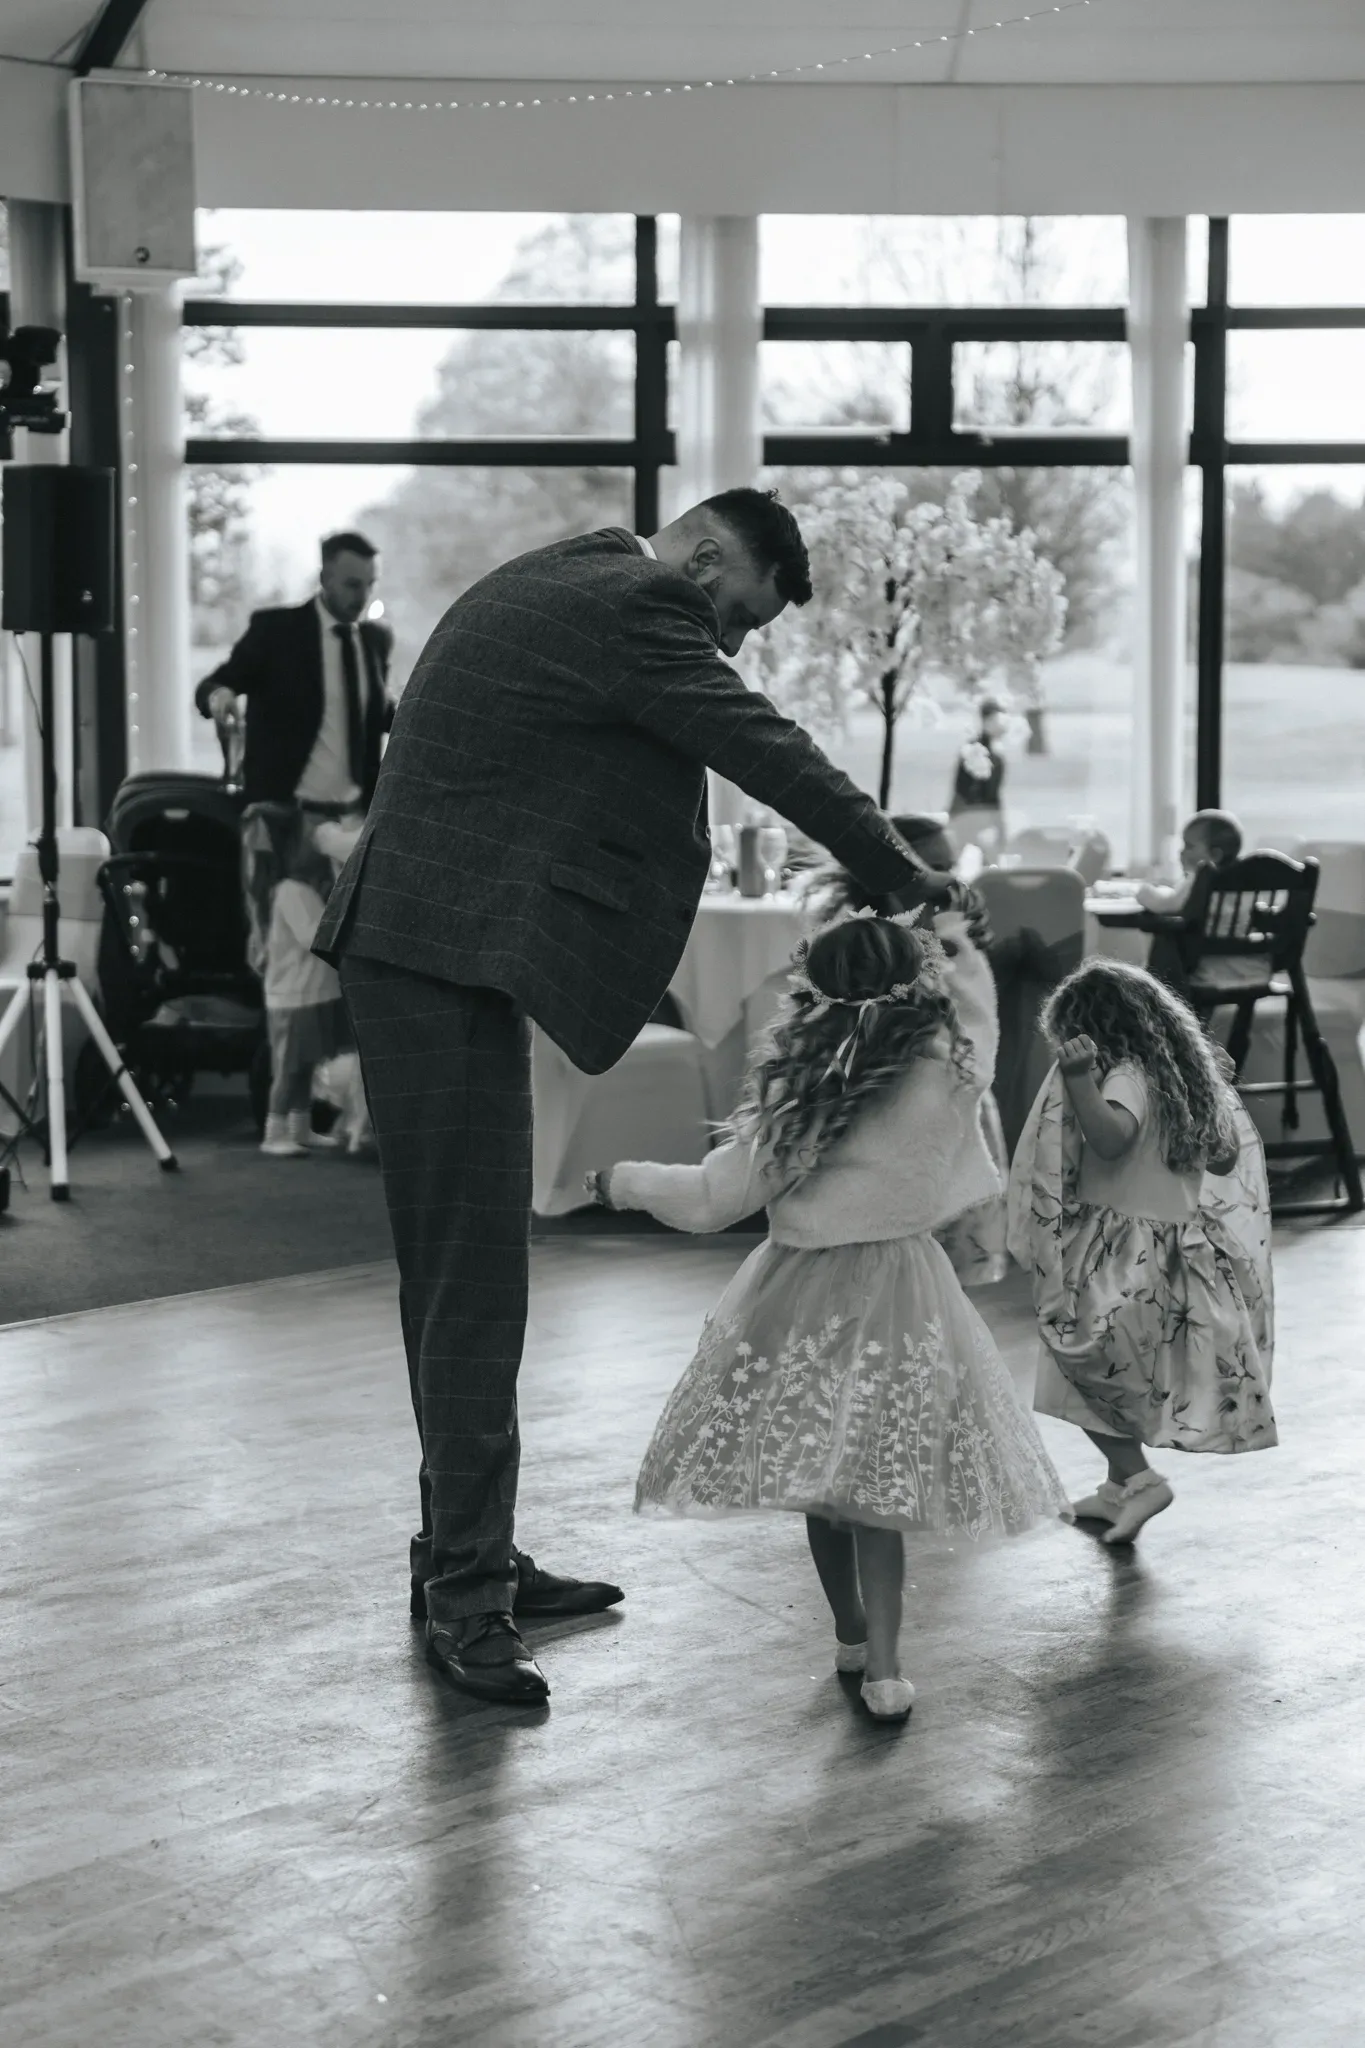 A man in a tailored suit playfully dances with two young girls in fancy dresses at an indoor event, likely a wedding. the setting features a bright room with large windows and a dance floor. the atmosphere is joyful and energetic.